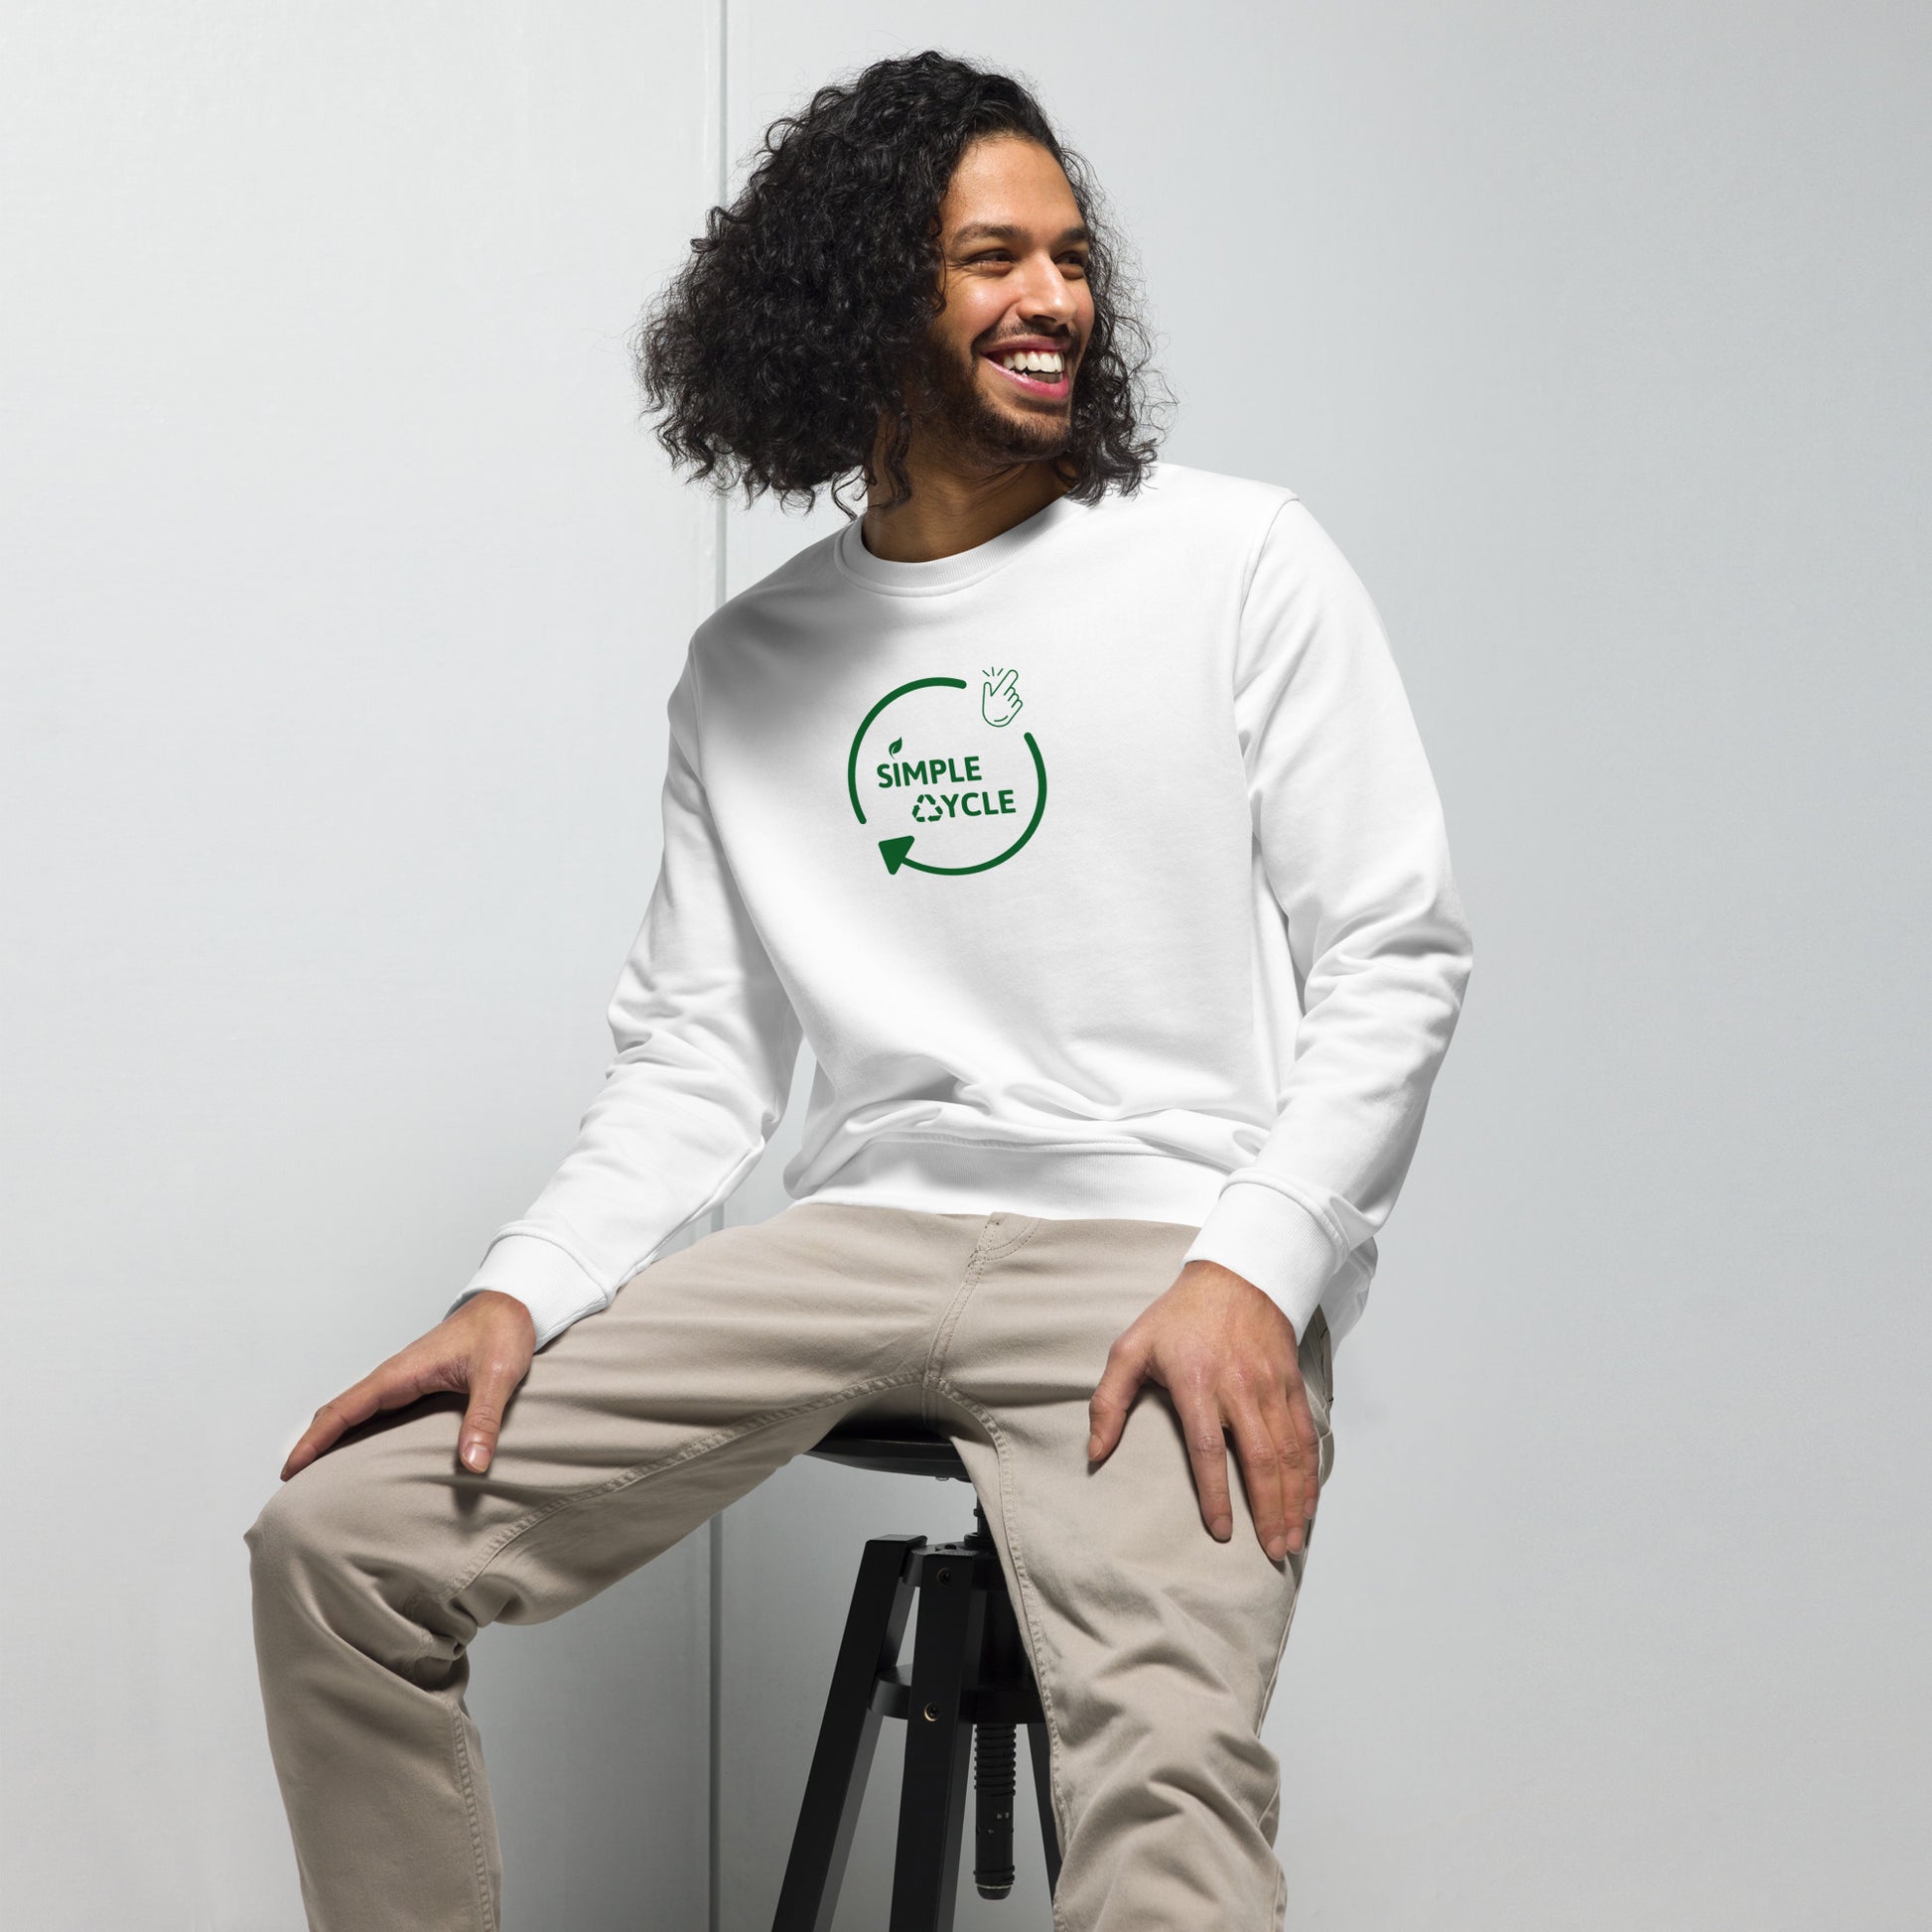 SimpleCycle Branded Unisex Organic Sweatshirt White model sitting on a chair